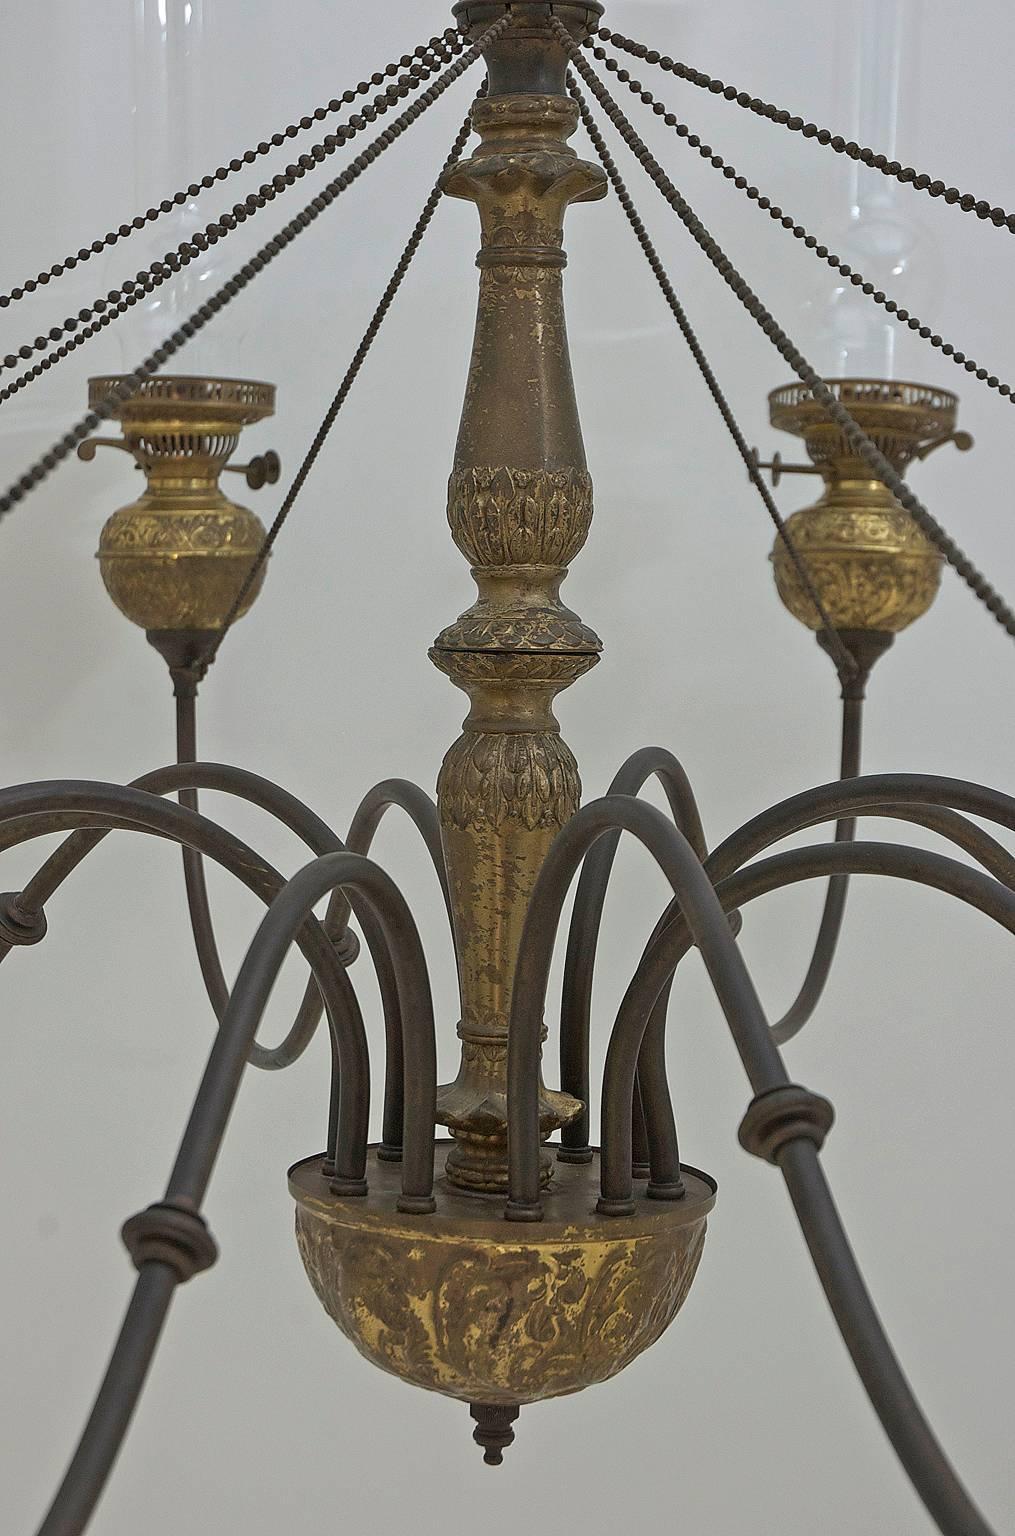 A ten-light chandelier in hand-hammered brass with glass chimneys. England, circa 1860-1880. Manufacturer stamped on gas cocks. "Made in England Duplex."
This chandelier was originally a Duplex double burner Paraffin Lamp which employed